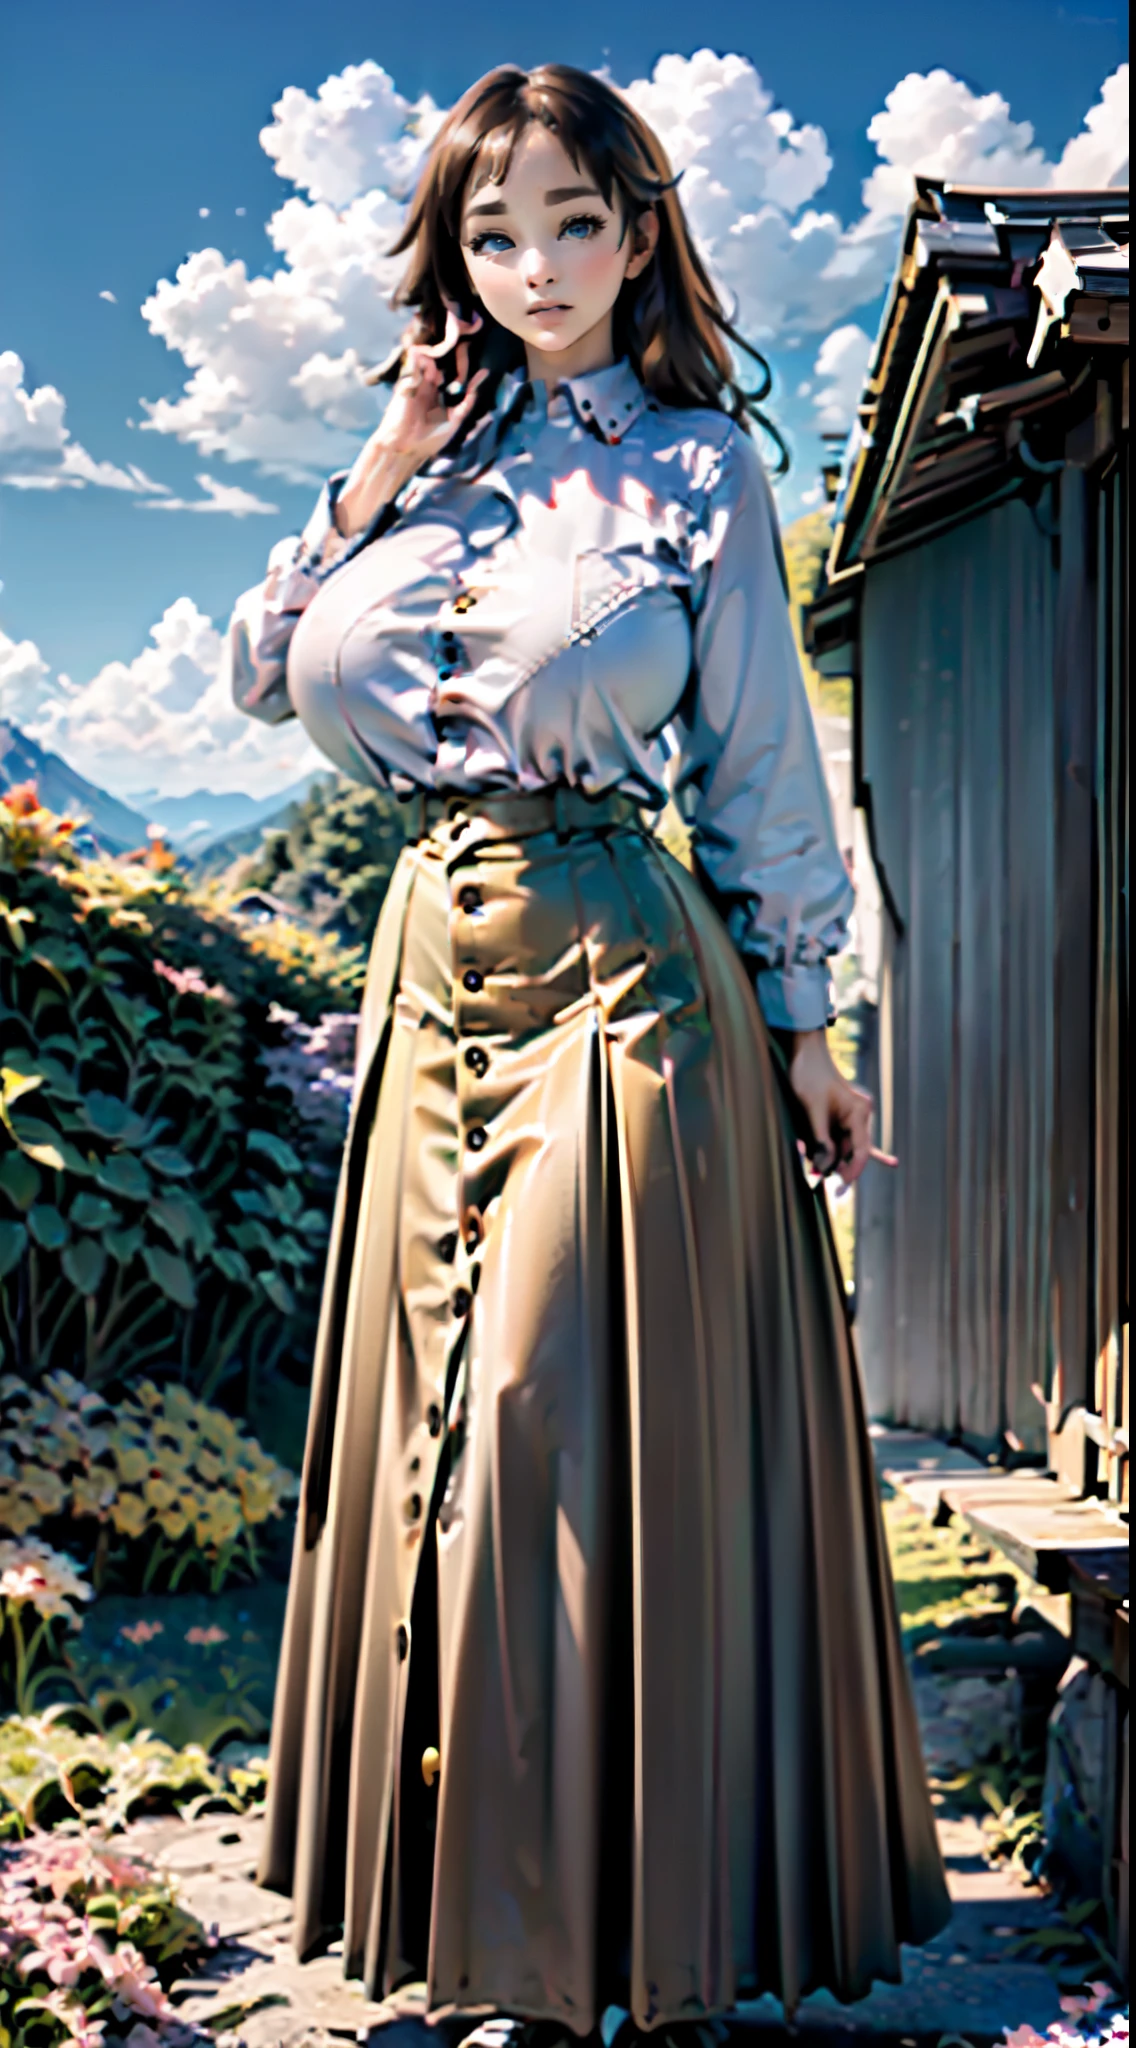 ((Beautiful 35_year_old japanese_woman with tan_skin, brown_hair and kitsune_ears)), (((standing_straight))), (((japanese_country_side))), ((wearing long_skirt with white_button_up_shirt), (((buttons_stretched))), ((full_body_photo)), ((((tube_shaped_breasts))), (((breasts_curved_upwards))), ((((((hyper_long_length_breasts)))))), ((((nipples_poking_upward)))), (((errect_nipples))), (((firm_breasts))), (((breasts_curved_outward from chest))), ((((pointy_breasts)))), (perfect_face), ((((narrow_breasts)))), (((curved_outward_nipples))), (((cylinder_shaped_breasts))), ((((breasts set far apart from each other)))), (((breasts_curving_up_to_sky))), ((smooth_skin)), (perfect_fingers), ((((oblong_breasts)))), (((beautiful_nipples))), ((perfect_fingers)), ((better_eyes)), (bright_sunlight), ((beautiful_face)), ((feminine_face)), (grassy_plain with mount_fuji in distance and sakura_flowers), (((perfect_nipples))), ((perfect_body)), (((perfect_hands))), (((best_quality))), (((perfect_fabric)))